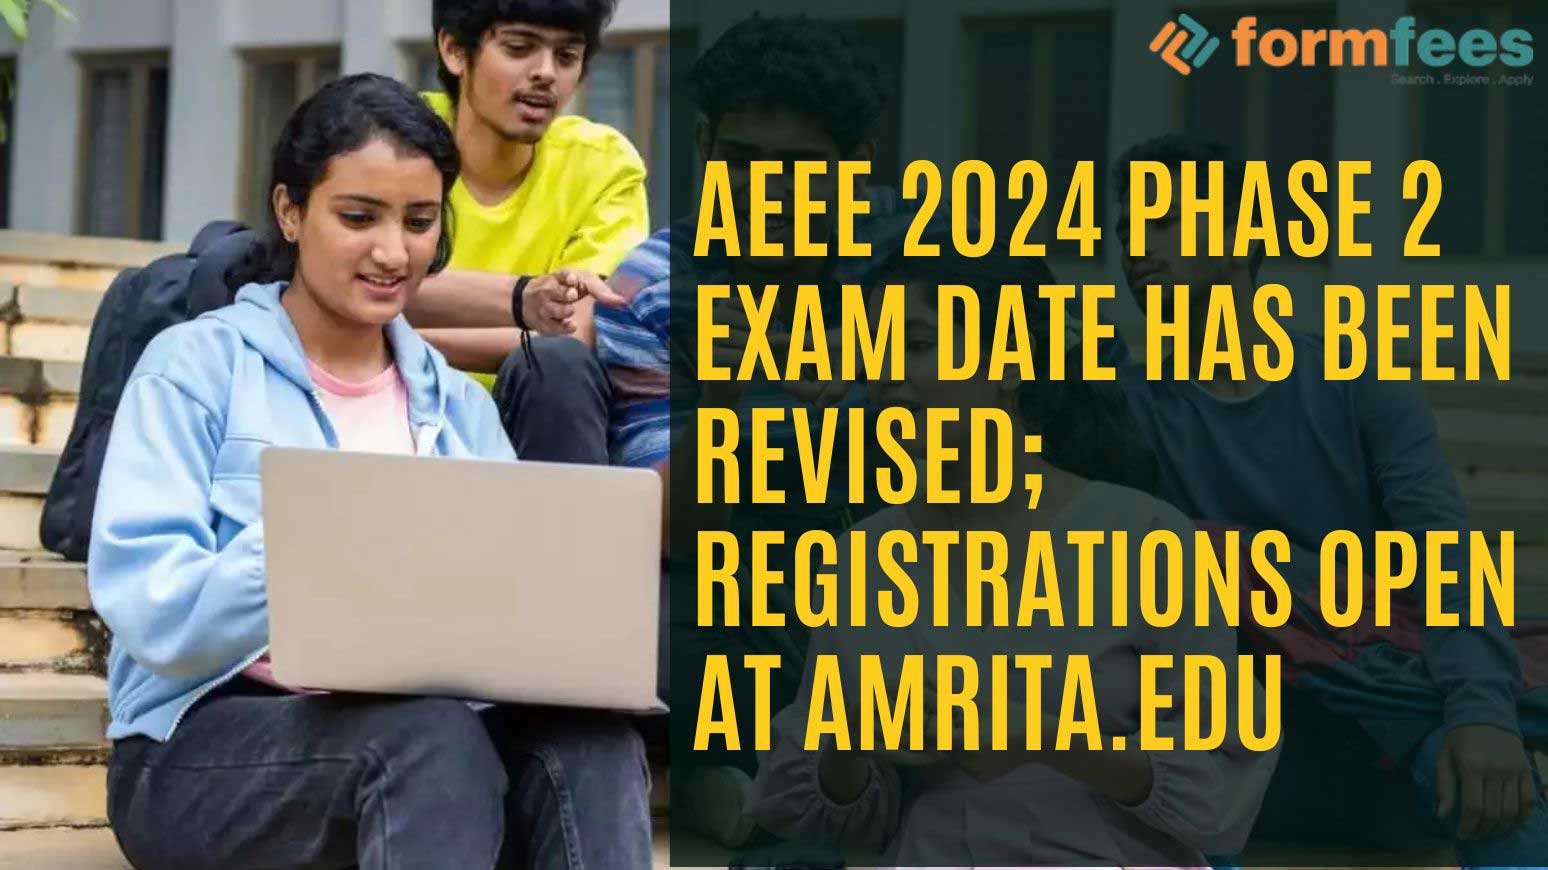 AEEE 2024 Phase 2 Exam Date has been Revised; Registrations Open at amrita.edu